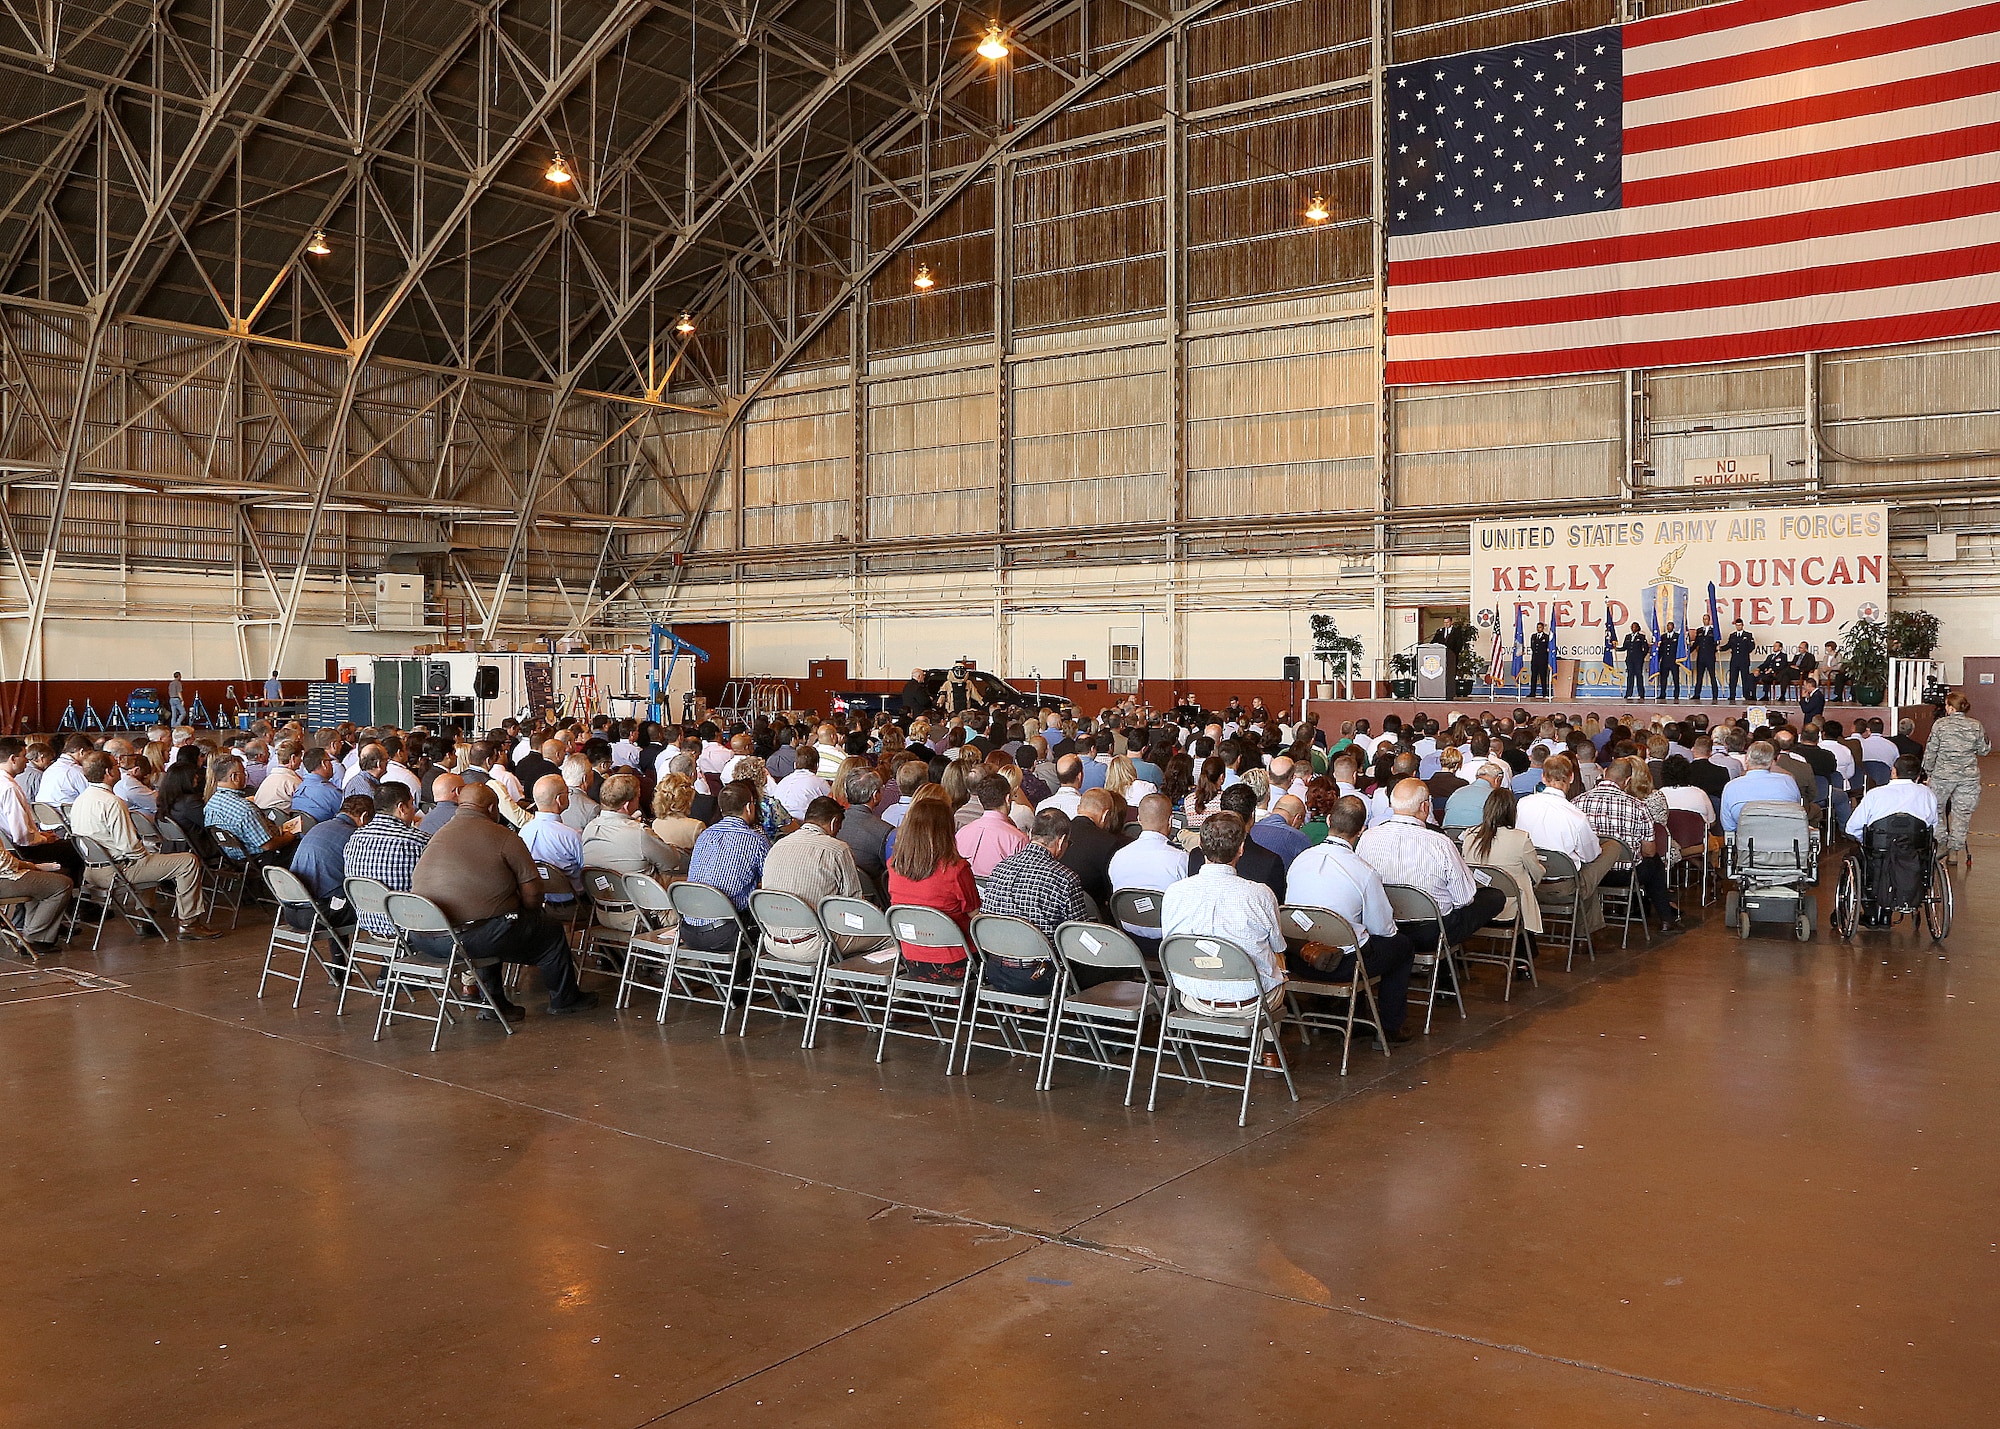 JOINT BASE SAN ANTONIO-LACKLAND, Texas -- More than 450 people attend a standup ceremony Oct. 1 in Hangar 1610 here for the newly formed Air Force Civil Engineer Center field operating agency, a subordinate to the Air Force Civil Engineer. The new FOA merges the Air Force Center for Engineering and the Environment and Air Force Real Property Agency, both based in San Antonio, with the Air Force Civil Engineer Support Agency at Tyndall Air Force Base, Fla., to form a more than 1,600-person strong unit. (U.S. Air Force photo/Robbin Cresswell)